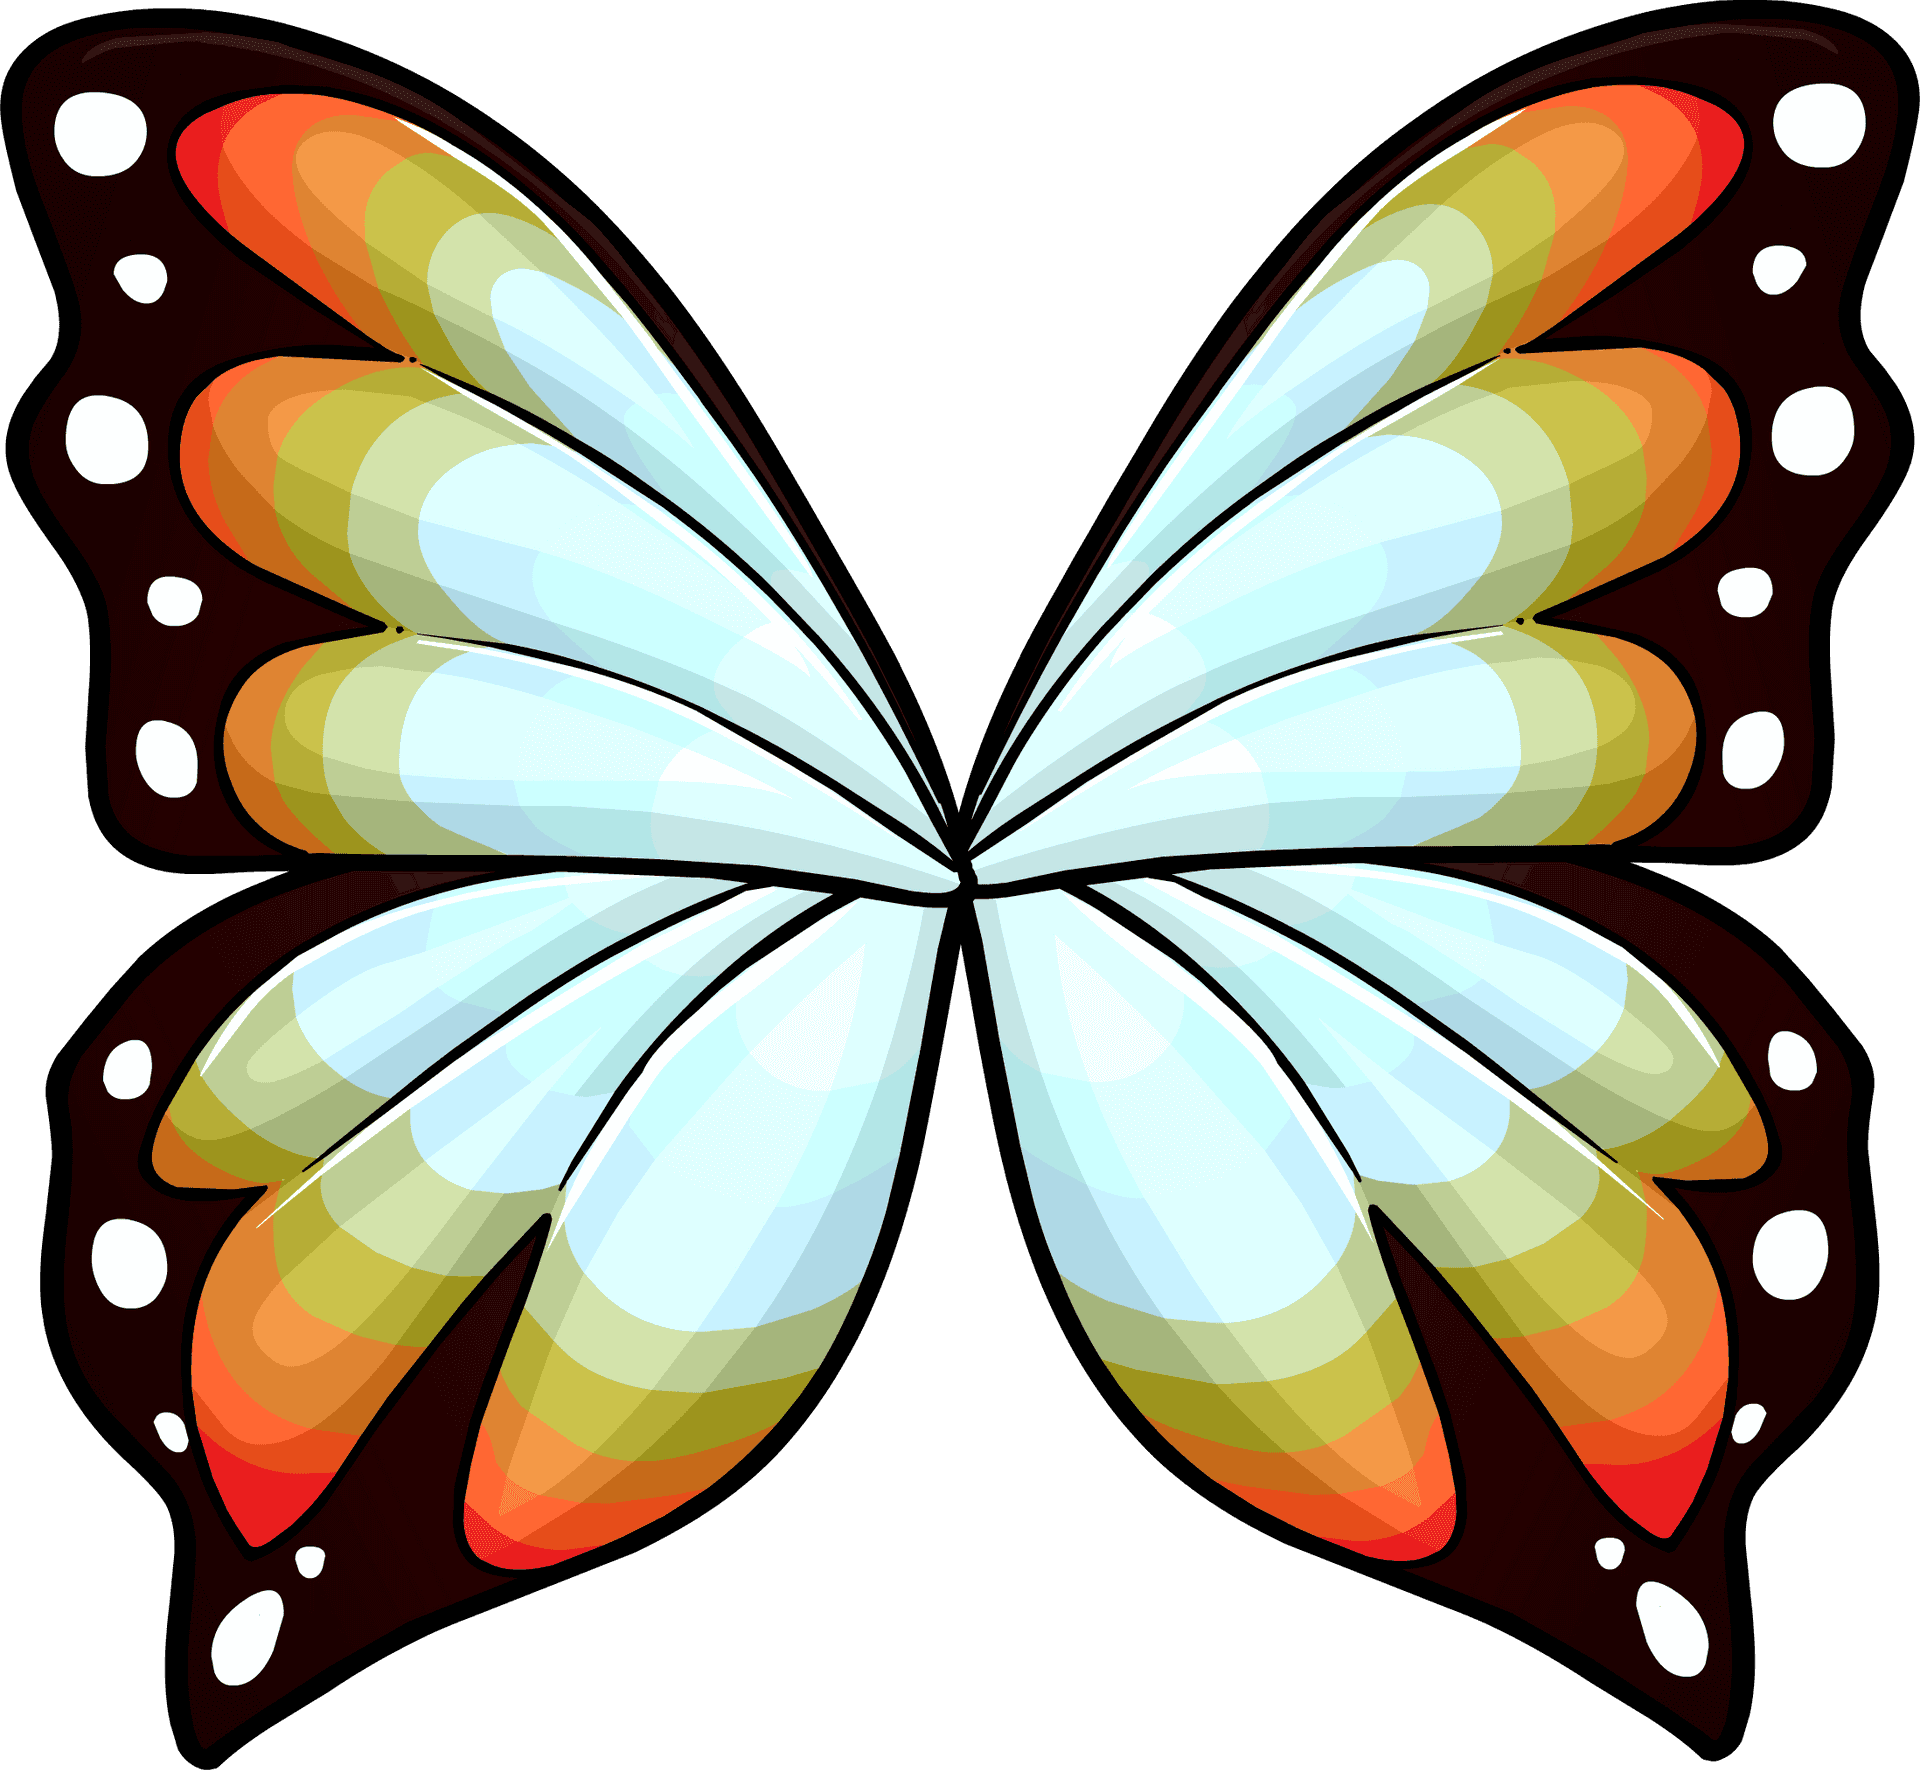 Colorful Butterfly Wings Illustration PNG